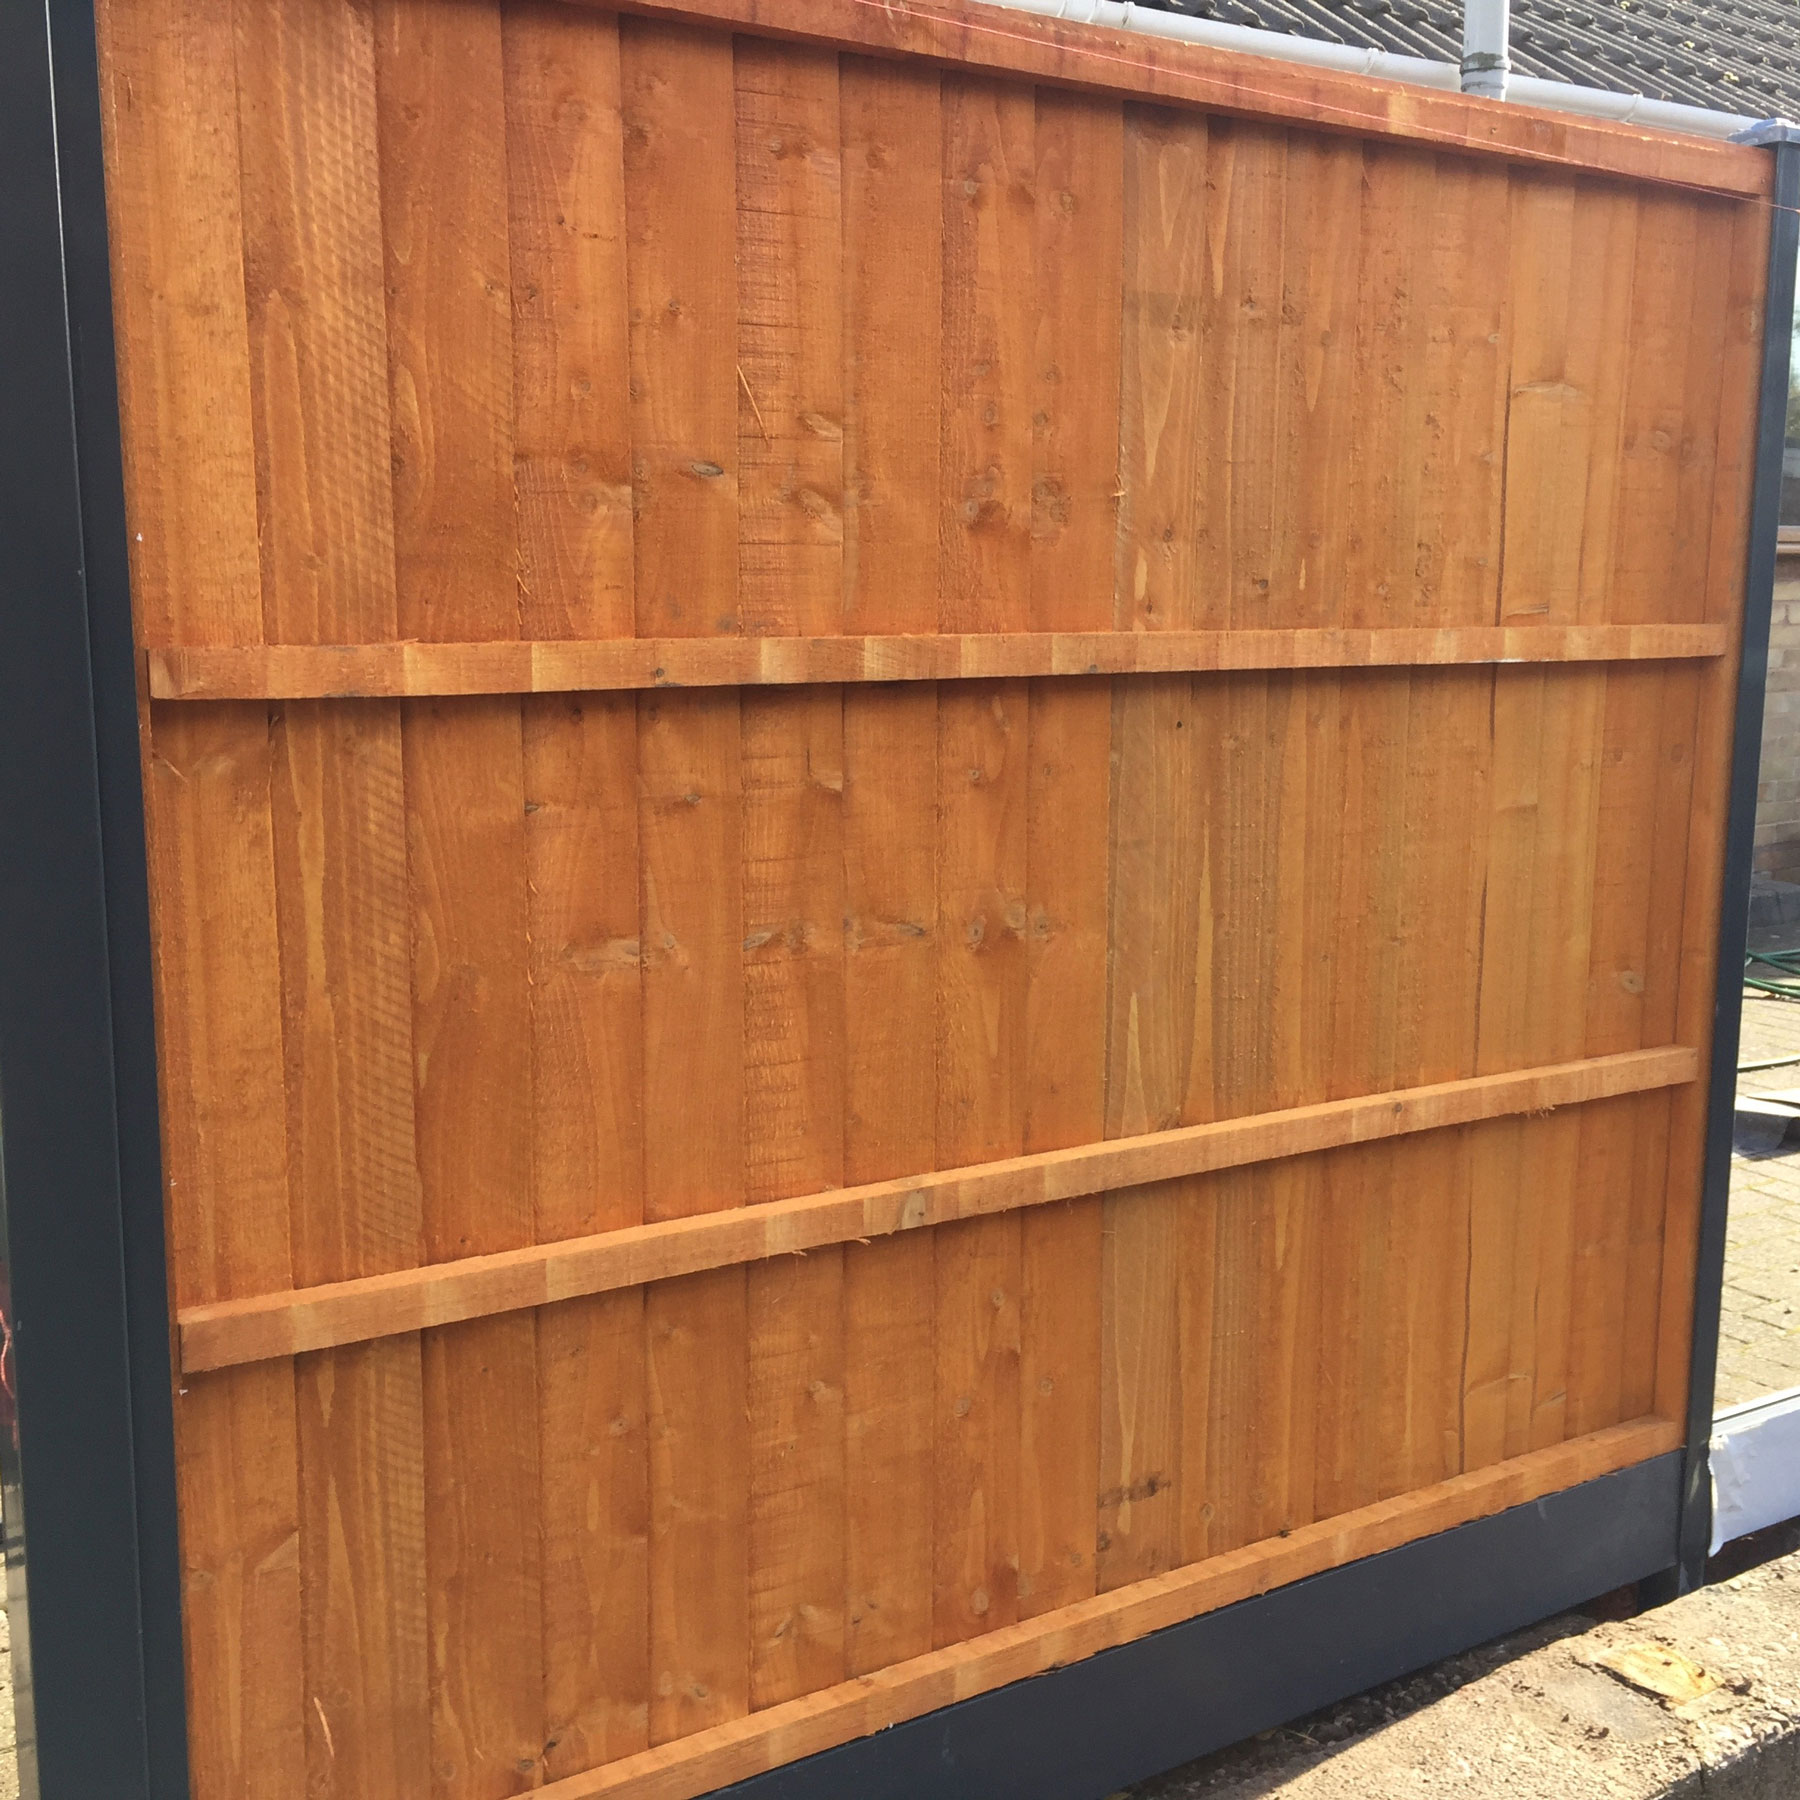 First 5 feet high fence panel fitted 